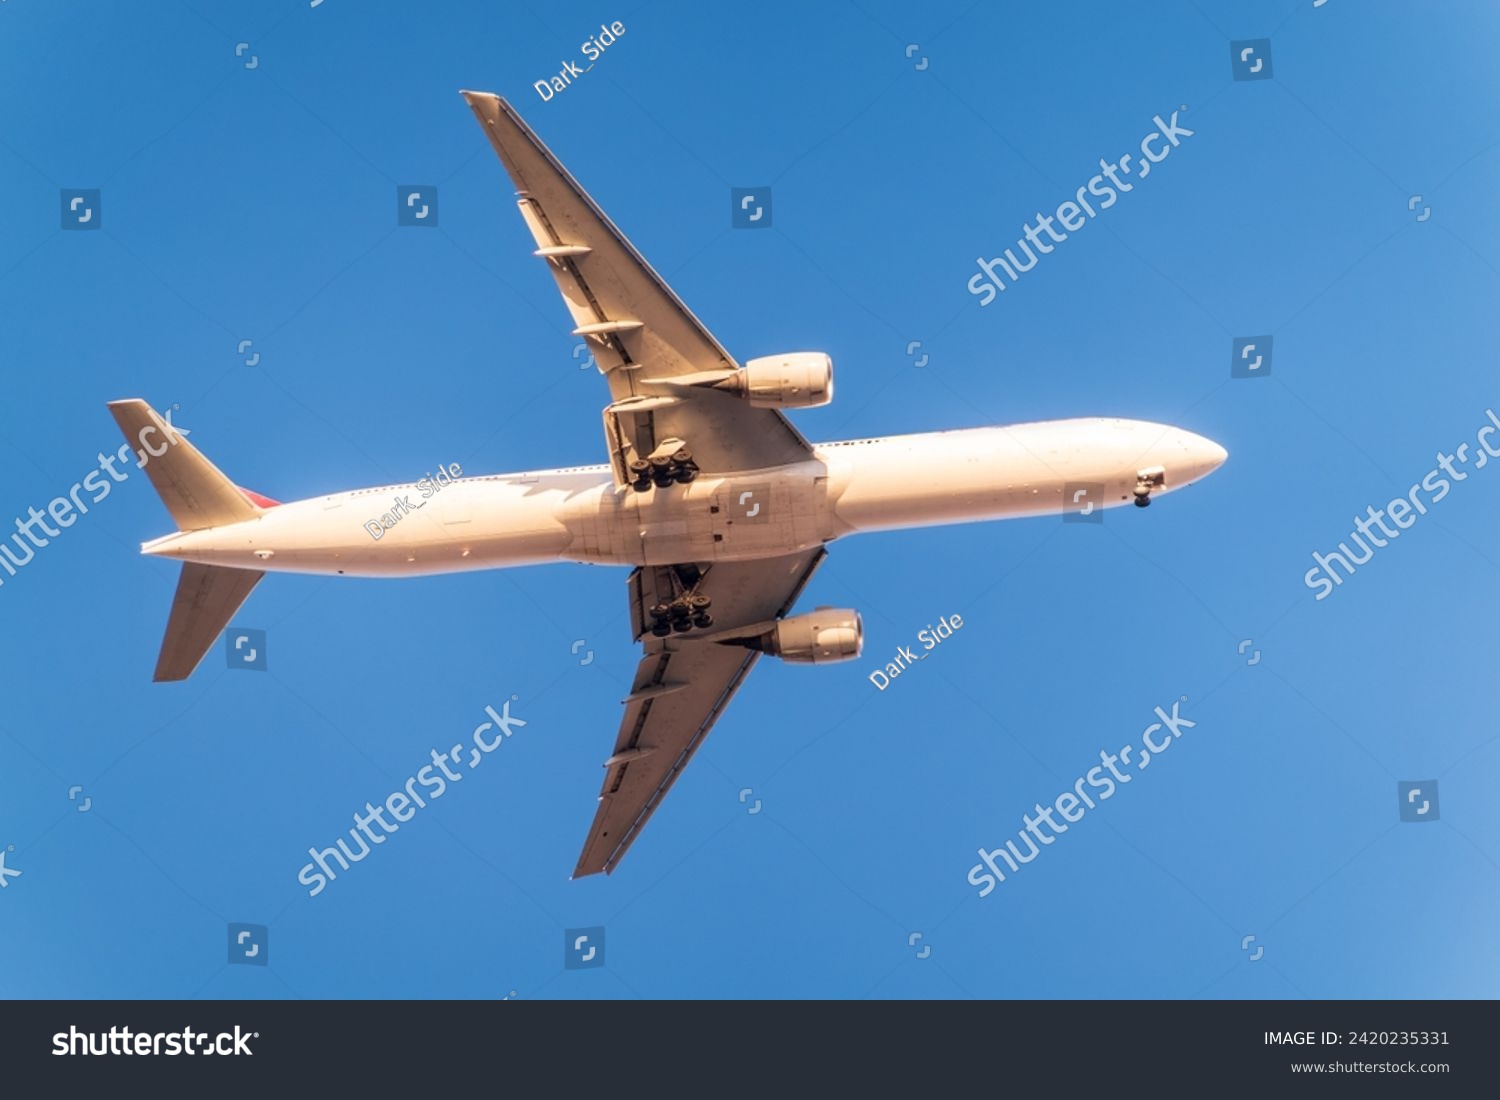 Airplane before landing in blue sky, Airbus A330. Air Transport. Tourism and travel concept. #2420235331